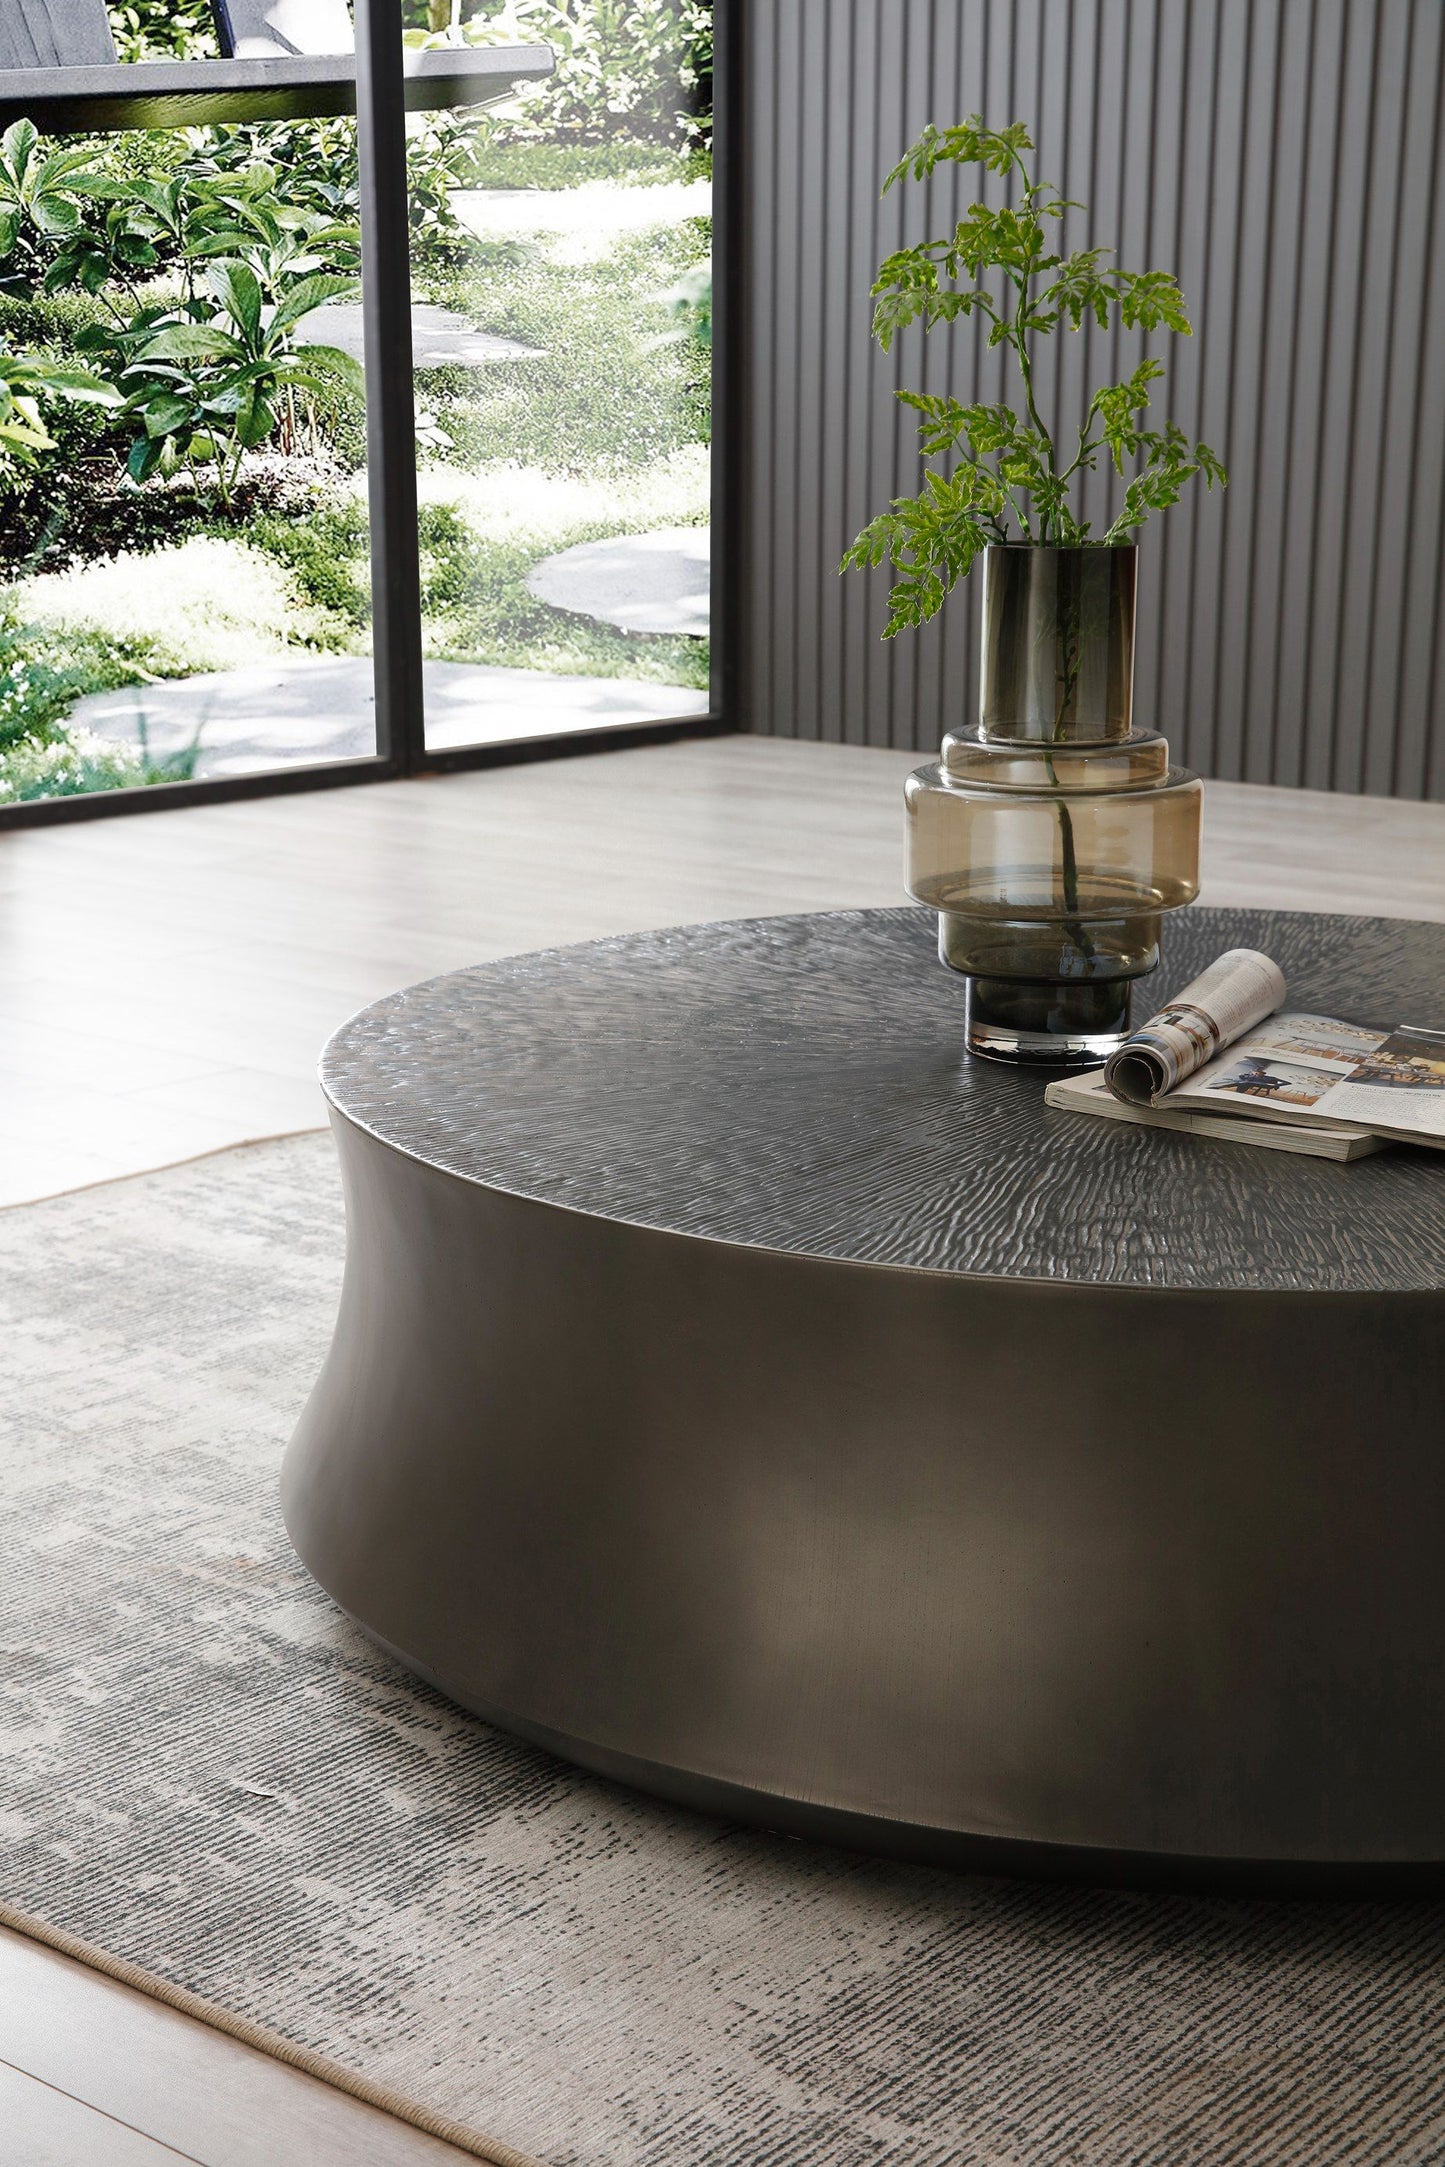 Modrest Airdrie - Modern Antique Grey Large Round Coffee Table